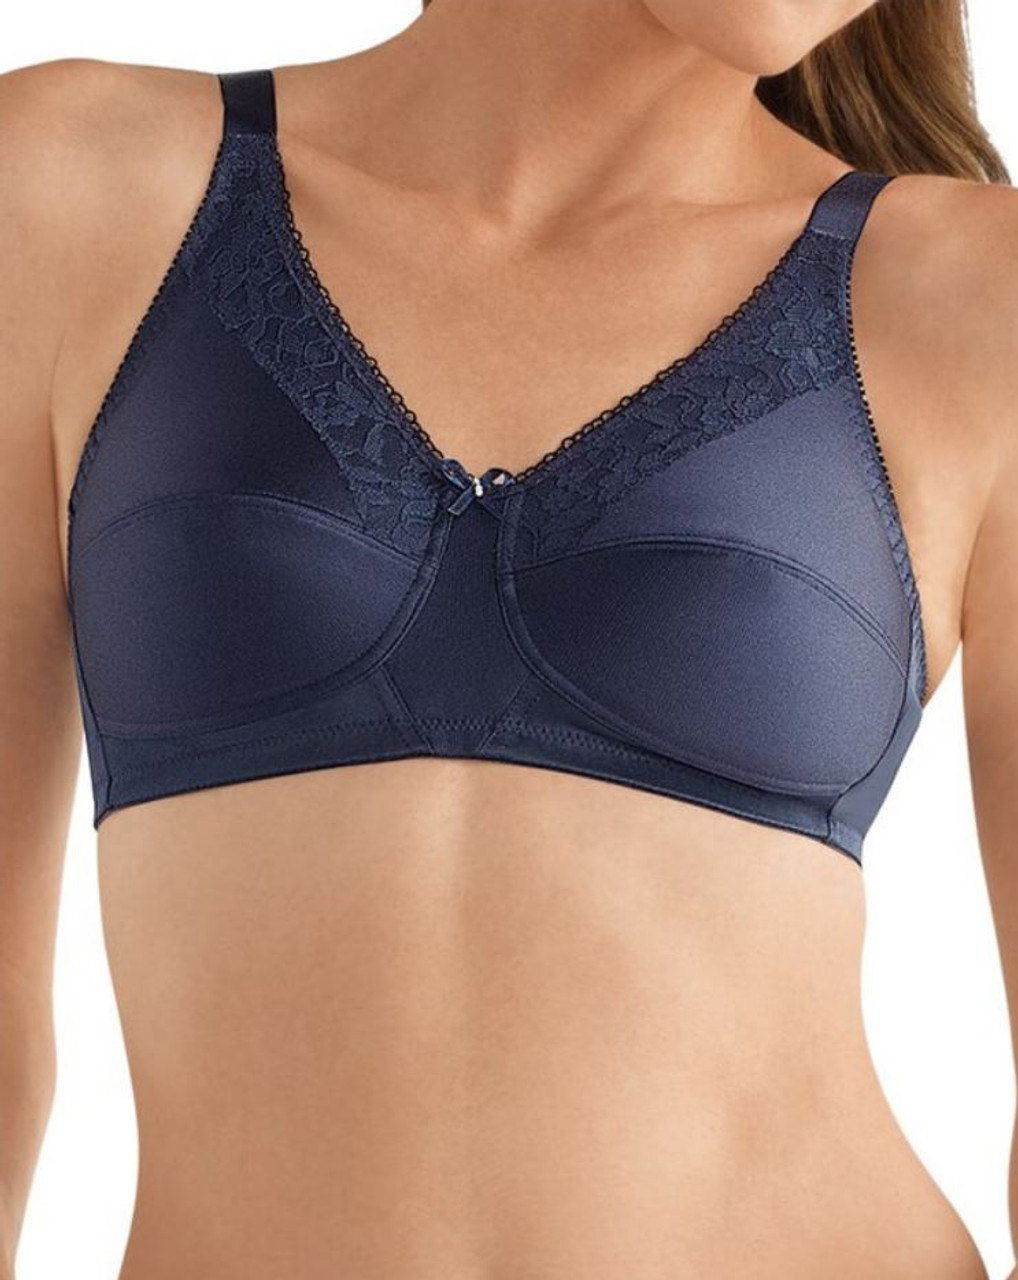 Intimicacywire-free Embroidered Mastectomy Bra For Women - Full